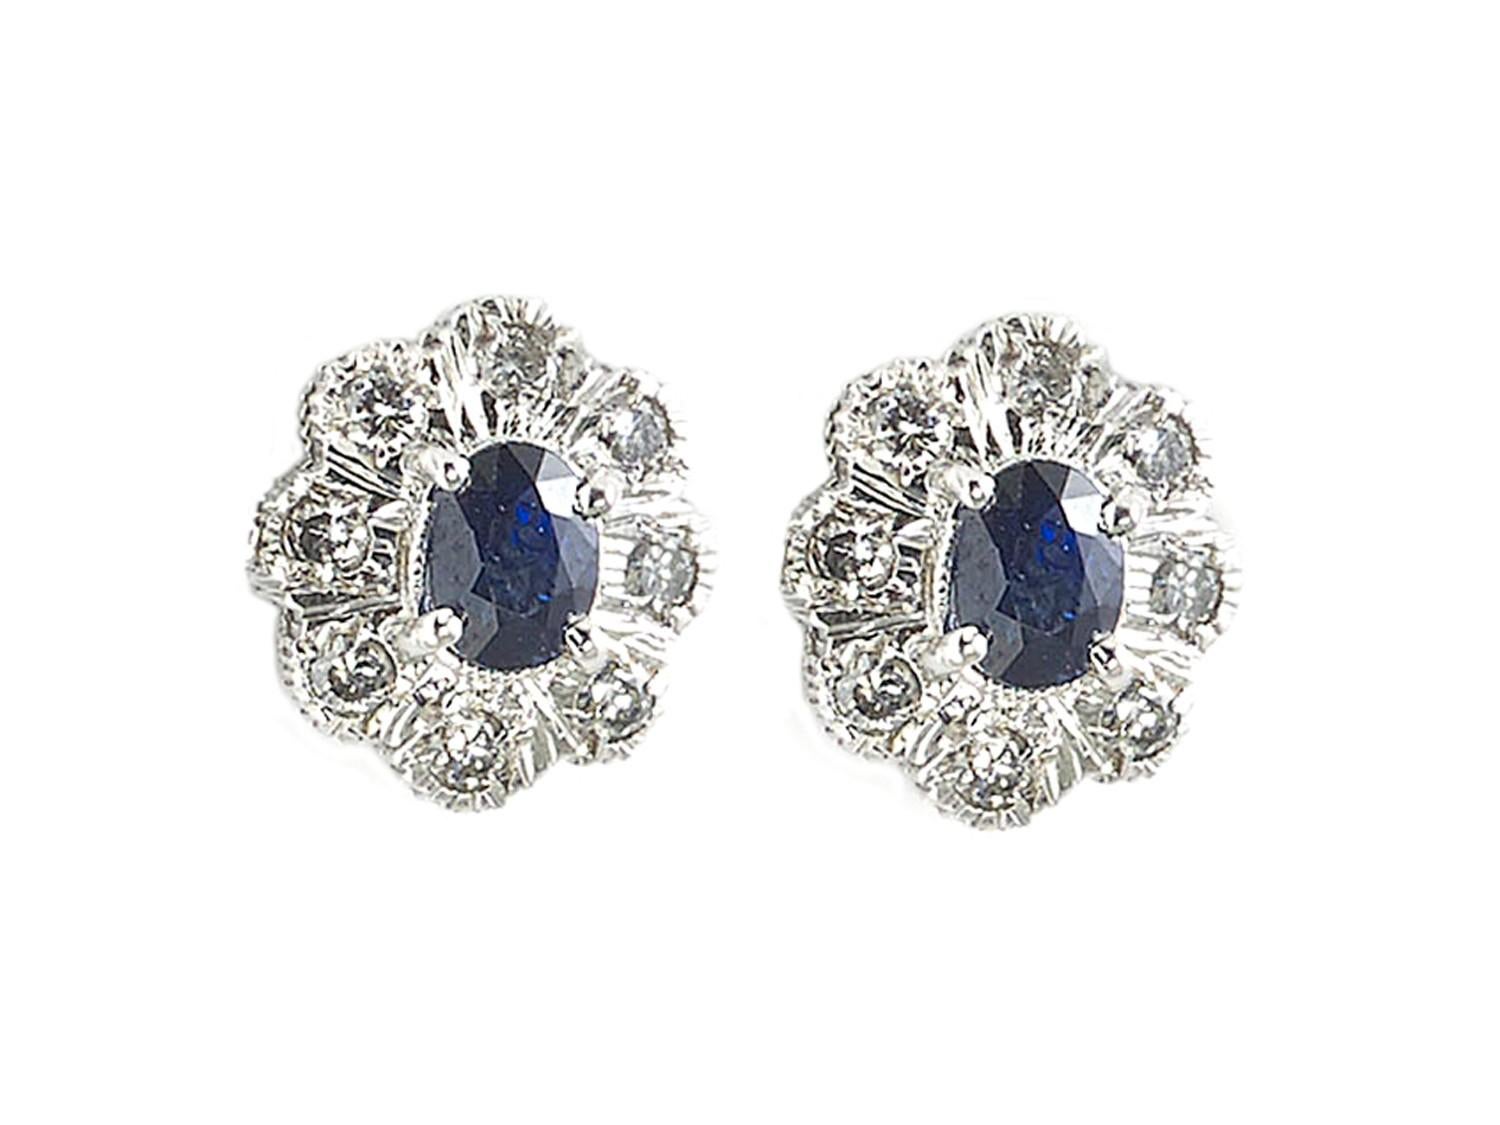 Vintage Sapphire And Diamond Cluster Stud Earrings, Circa 1960 In Excellent Condition For Sale In London, GB